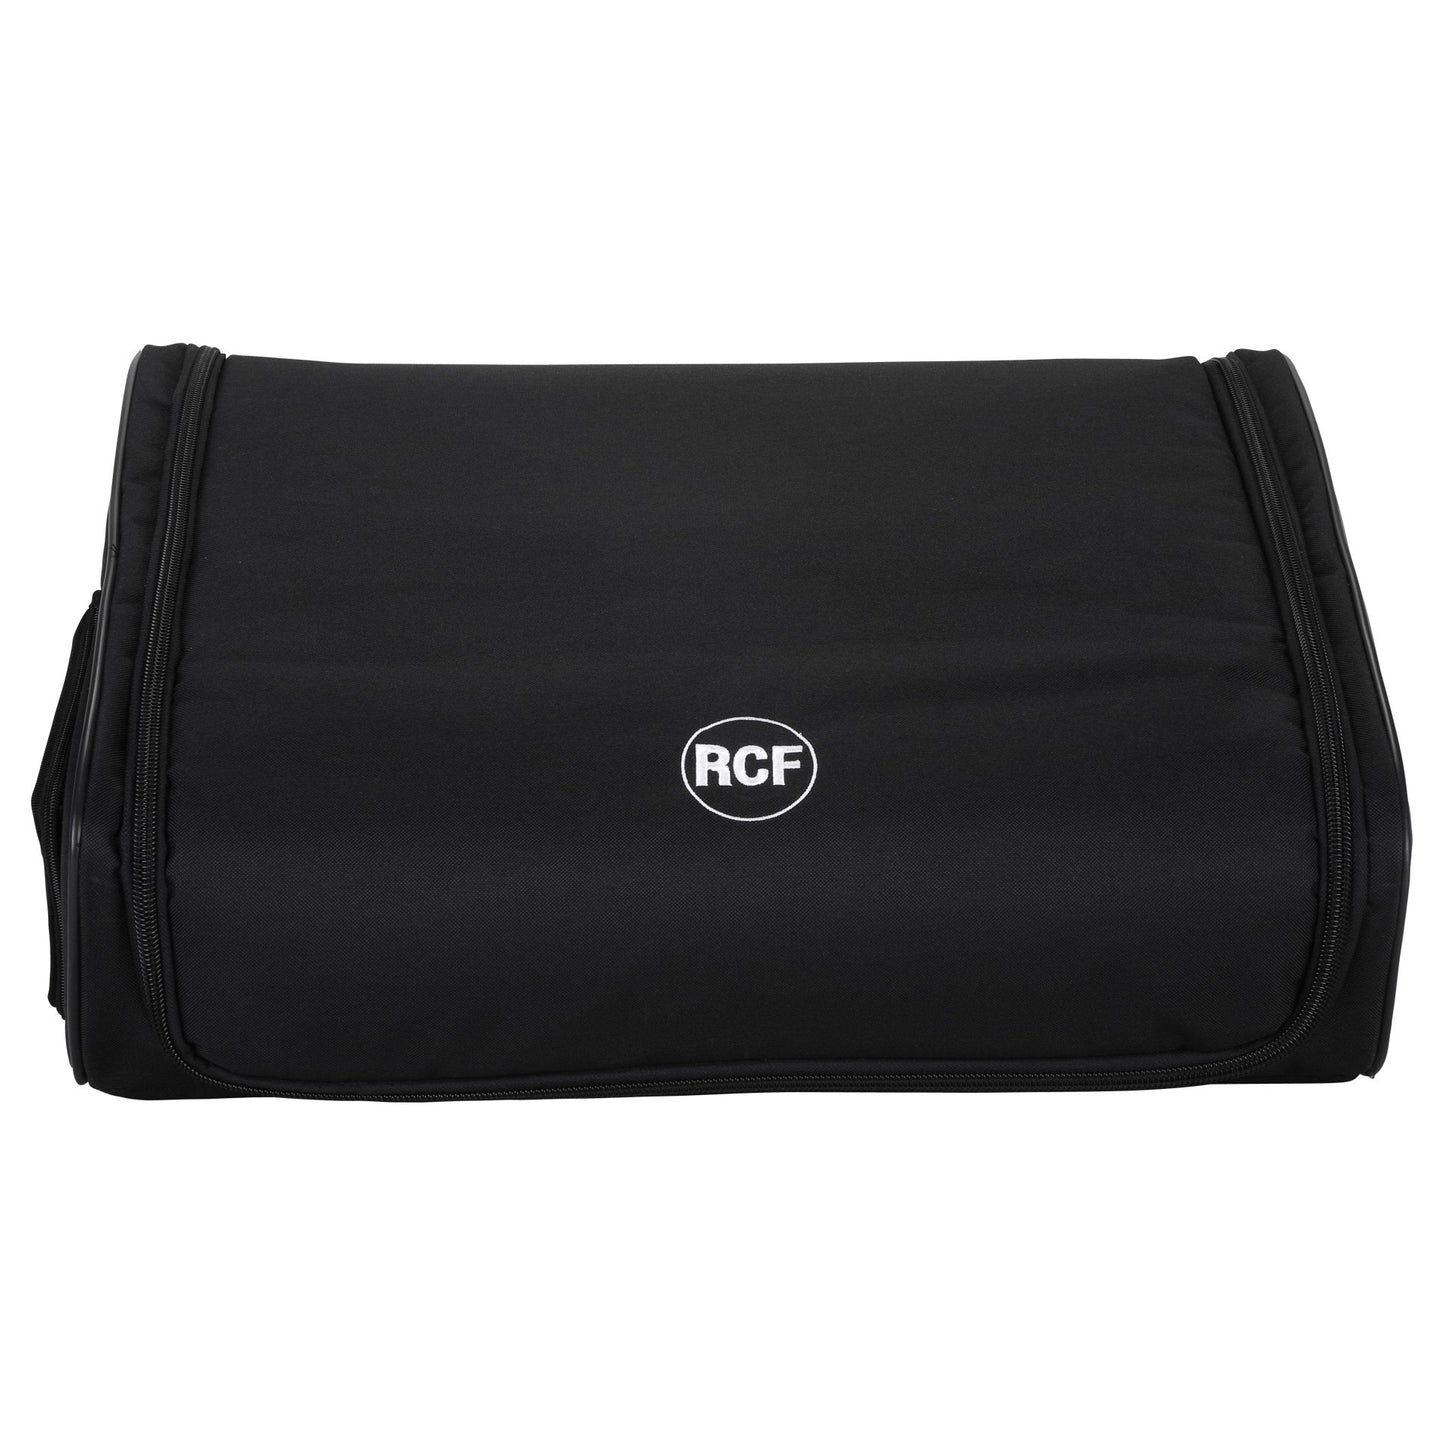 RCF COVER-NX12SMA Protective Cover for NX12-SMA